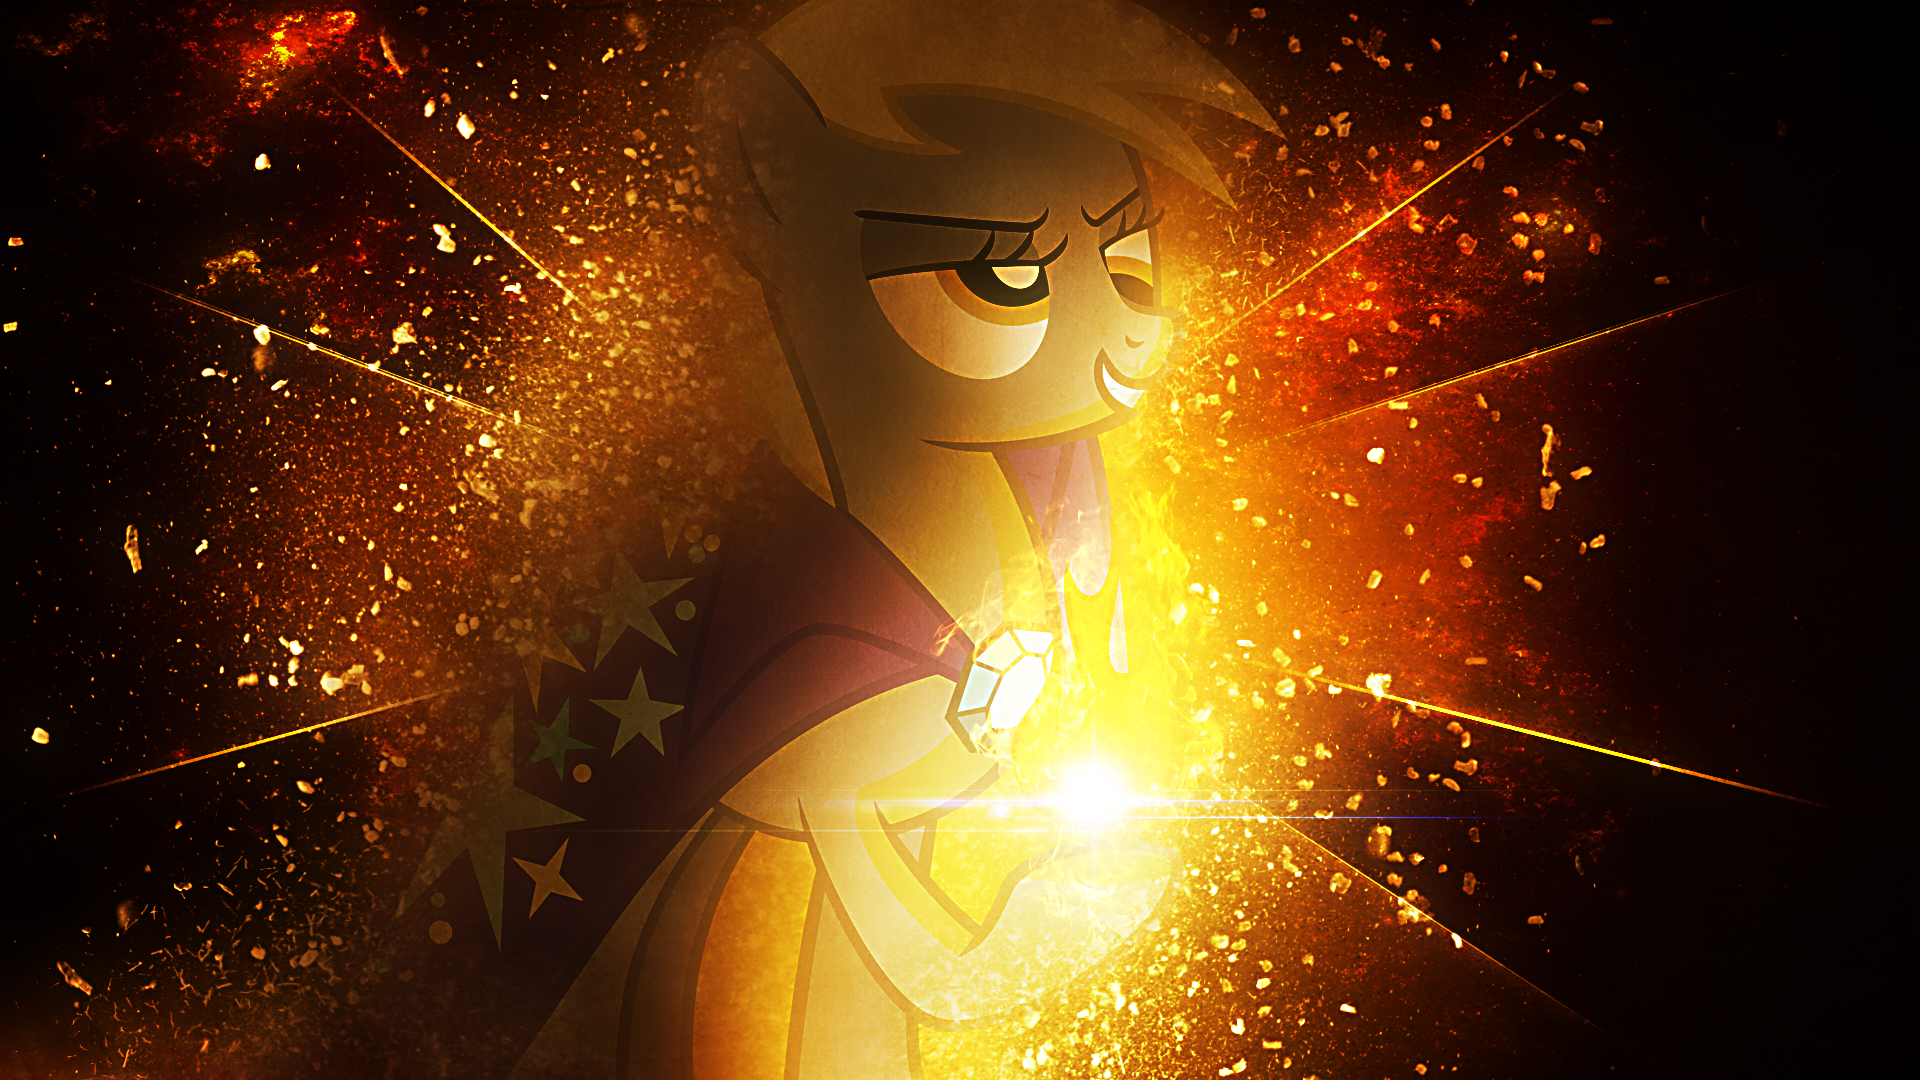 Derpy The Master of Fire - Wallpaper by delectablecoffee and Tzolkine